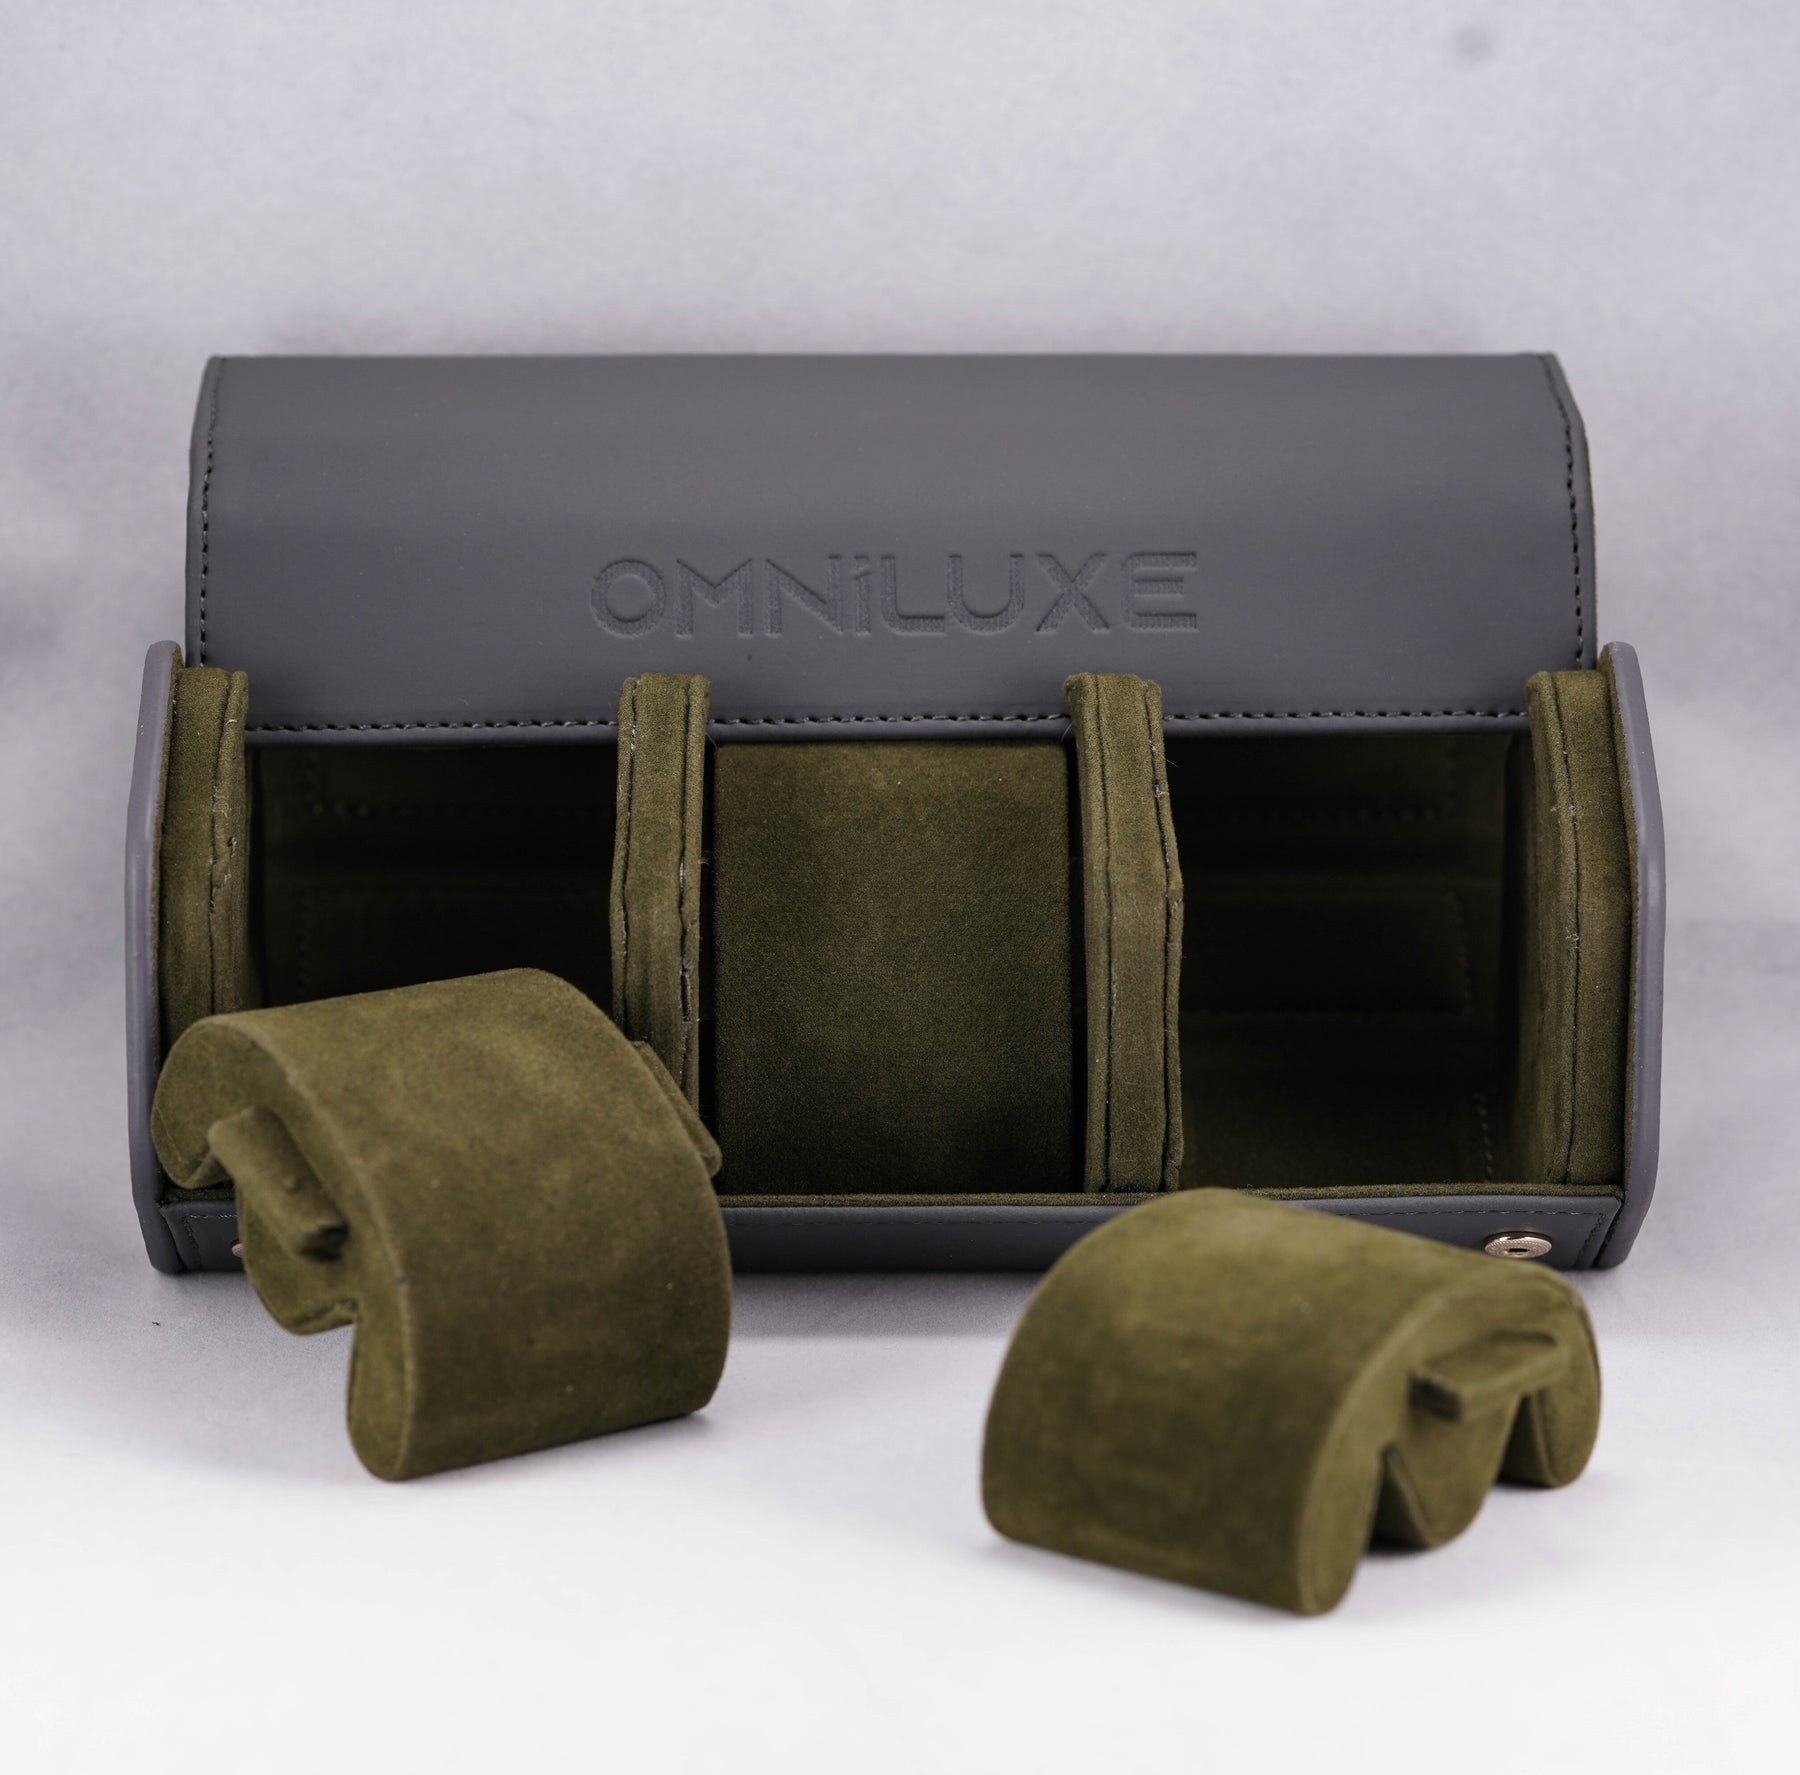 SIGNATURE OMNILUXE WATCH TRAVEL CASE - TRIPLE SLOTS